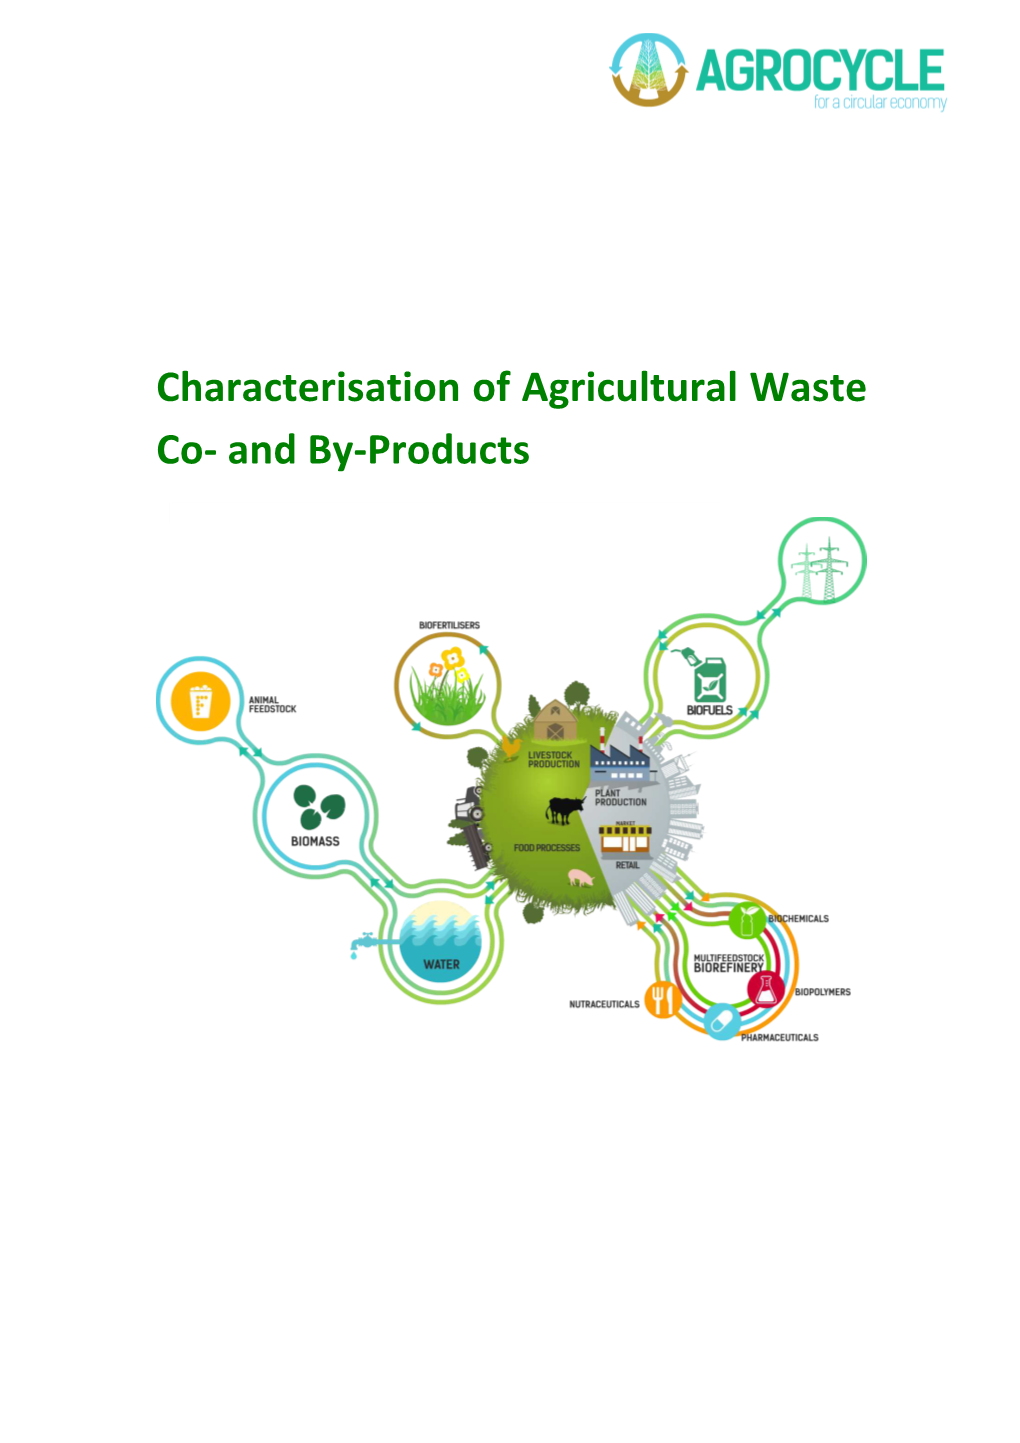 Characterisation of Agricultural Waste Co- and By-Products